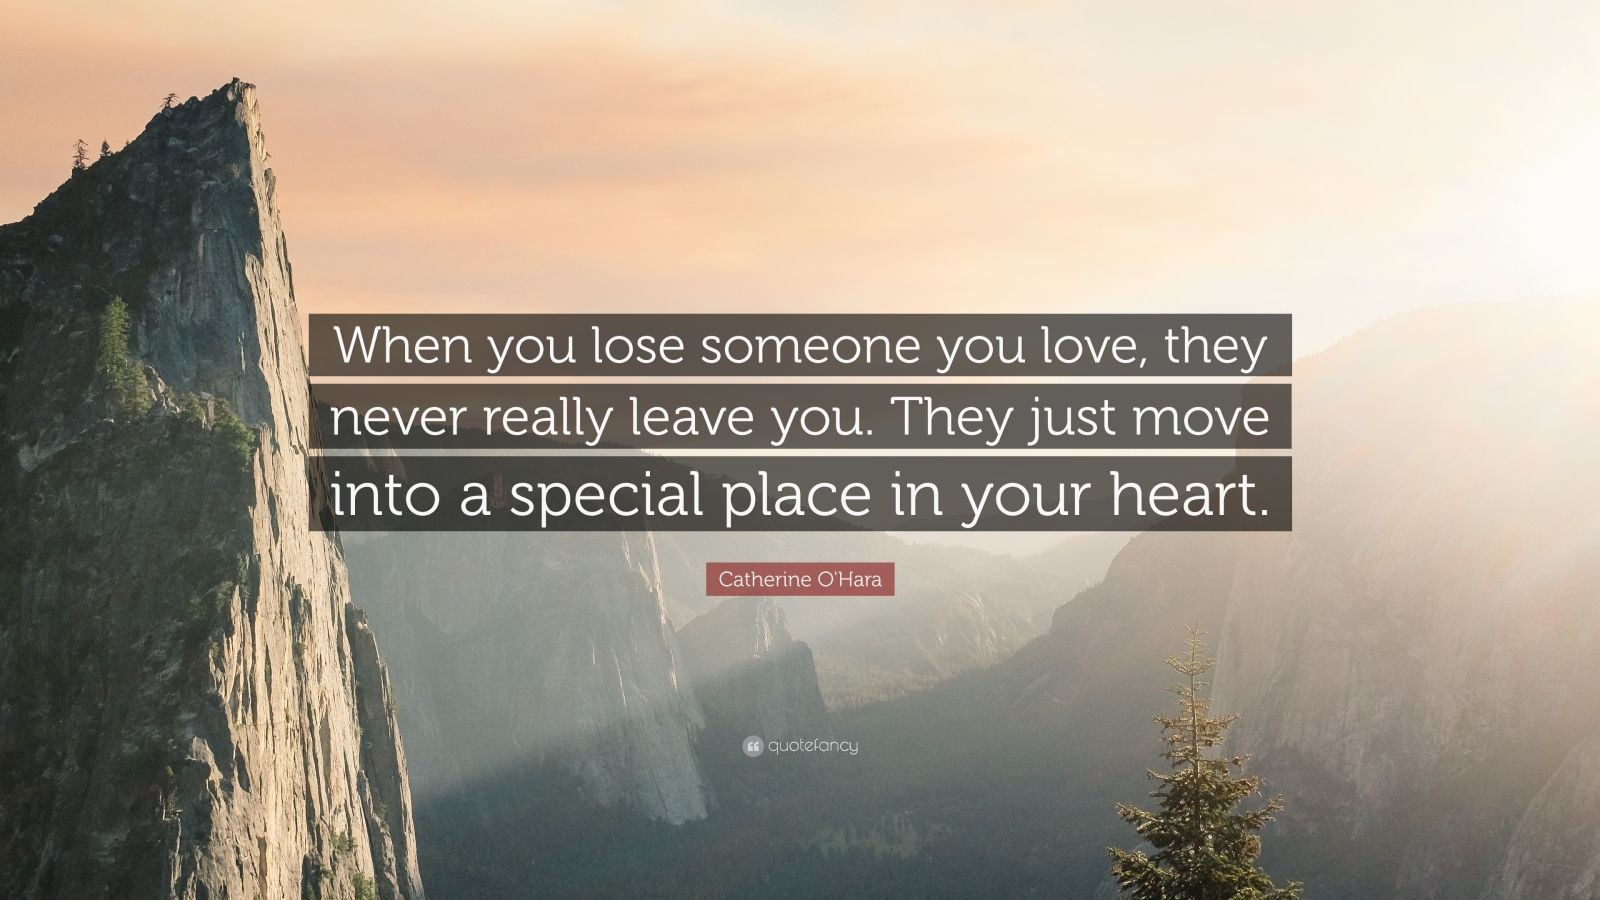 Catherine O'Hara Quote: “When you lose someone you love, they never ...